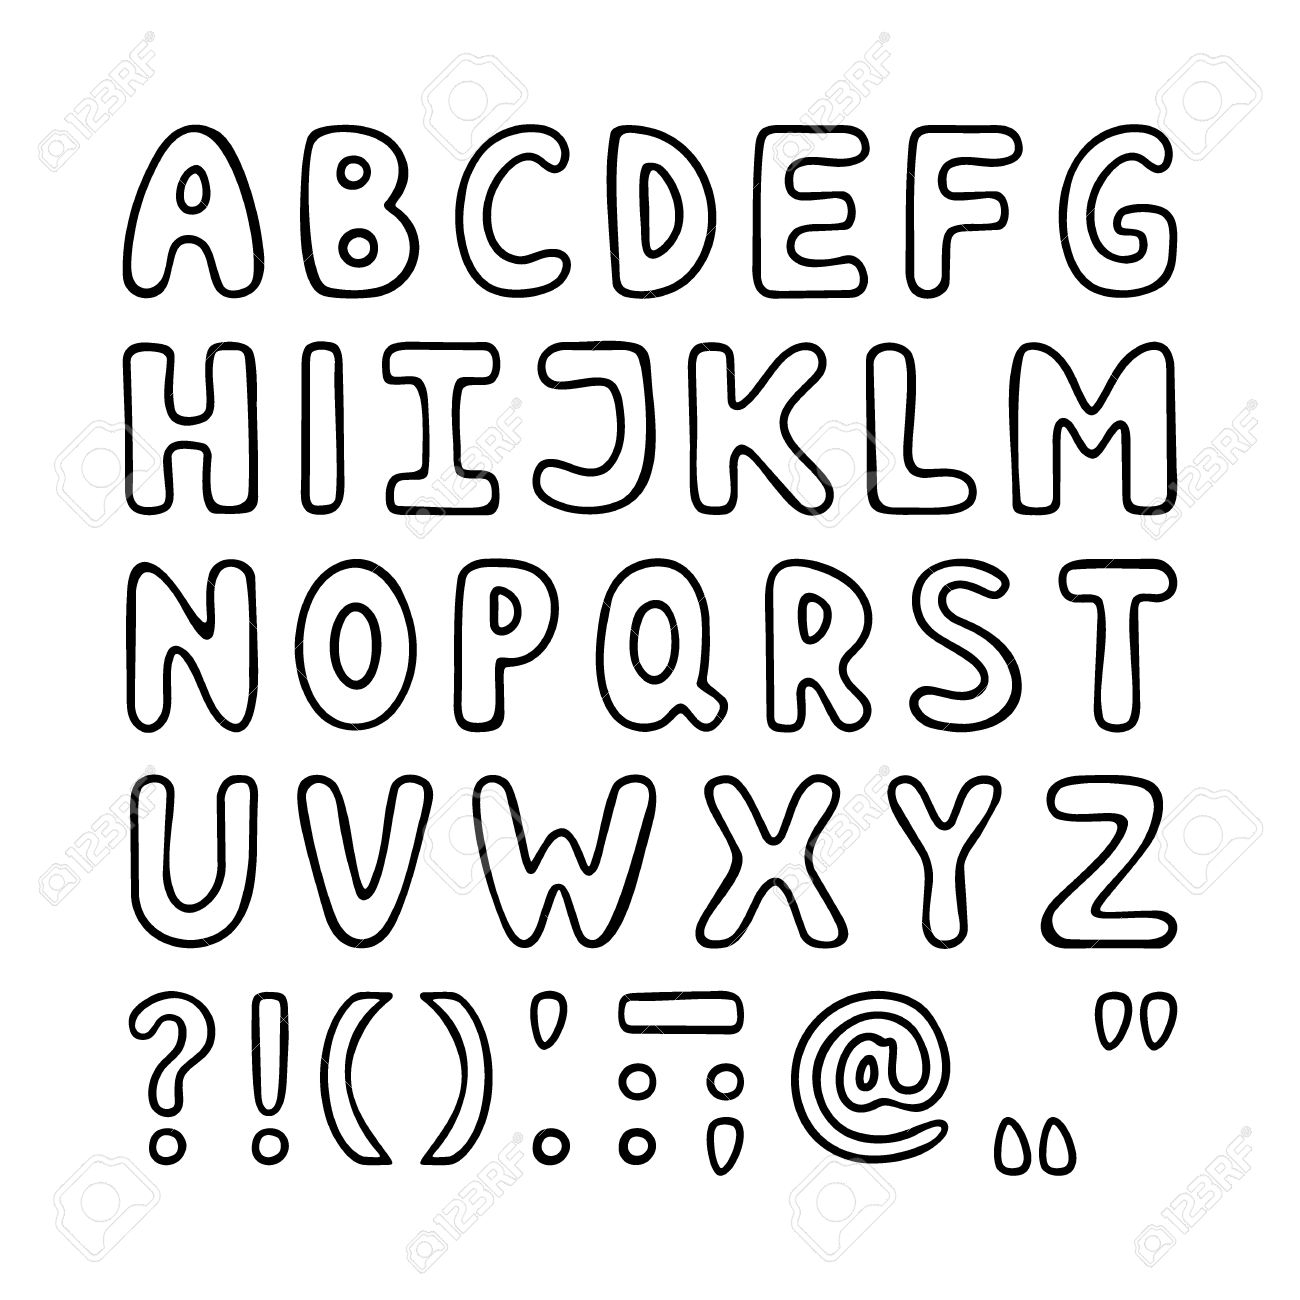 12674 Letters free clipart.